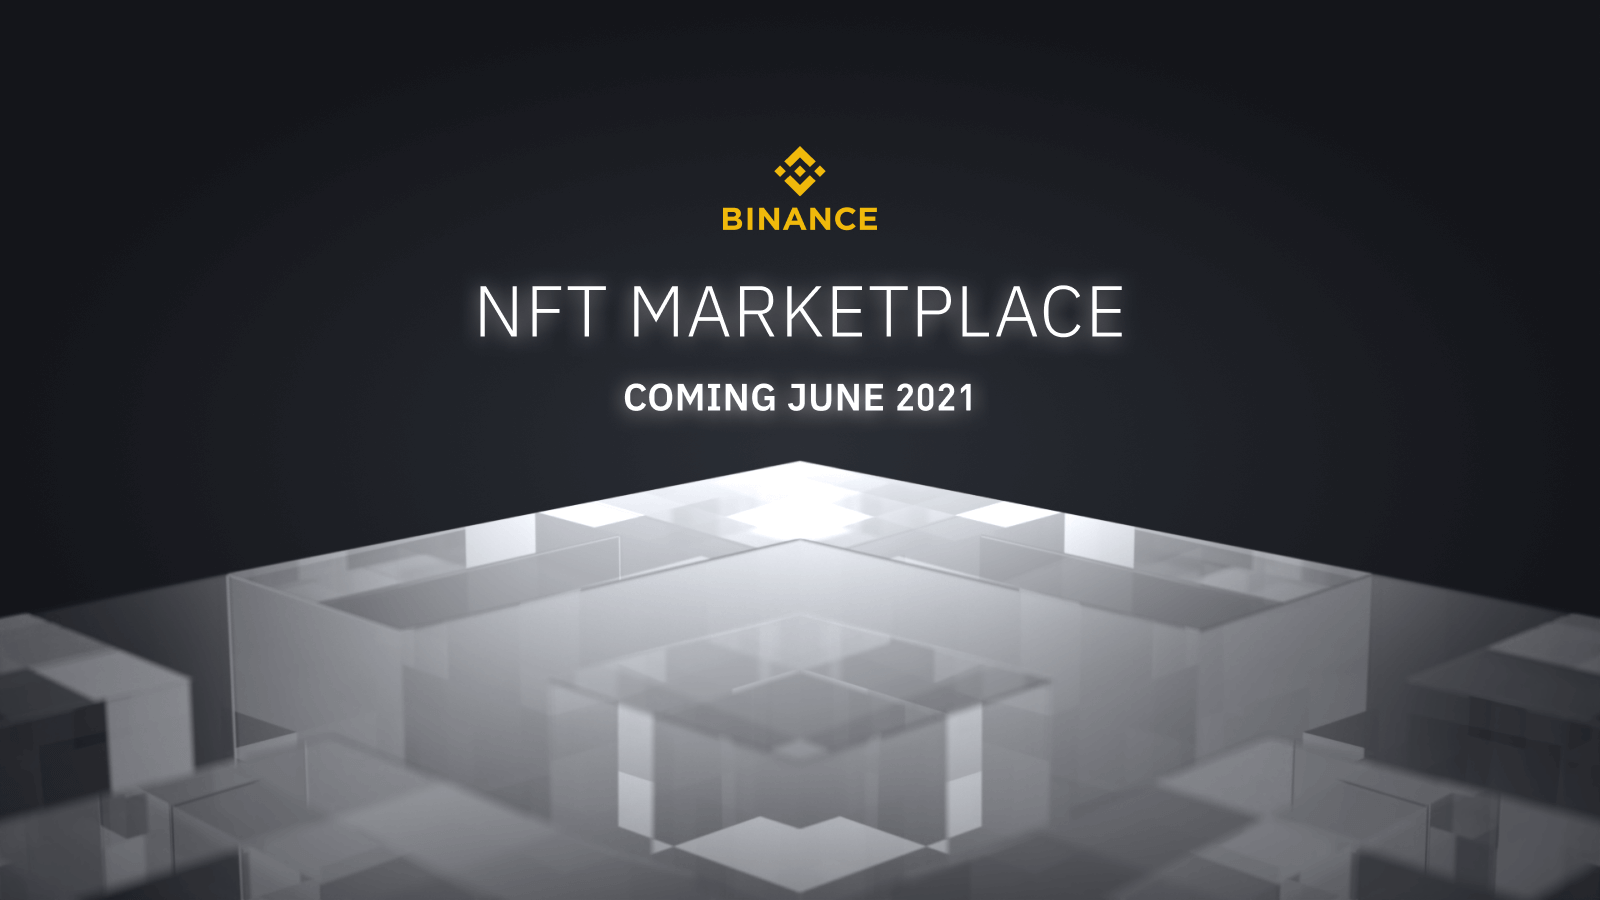 Binance to launch NFT Marketplace by June 2021